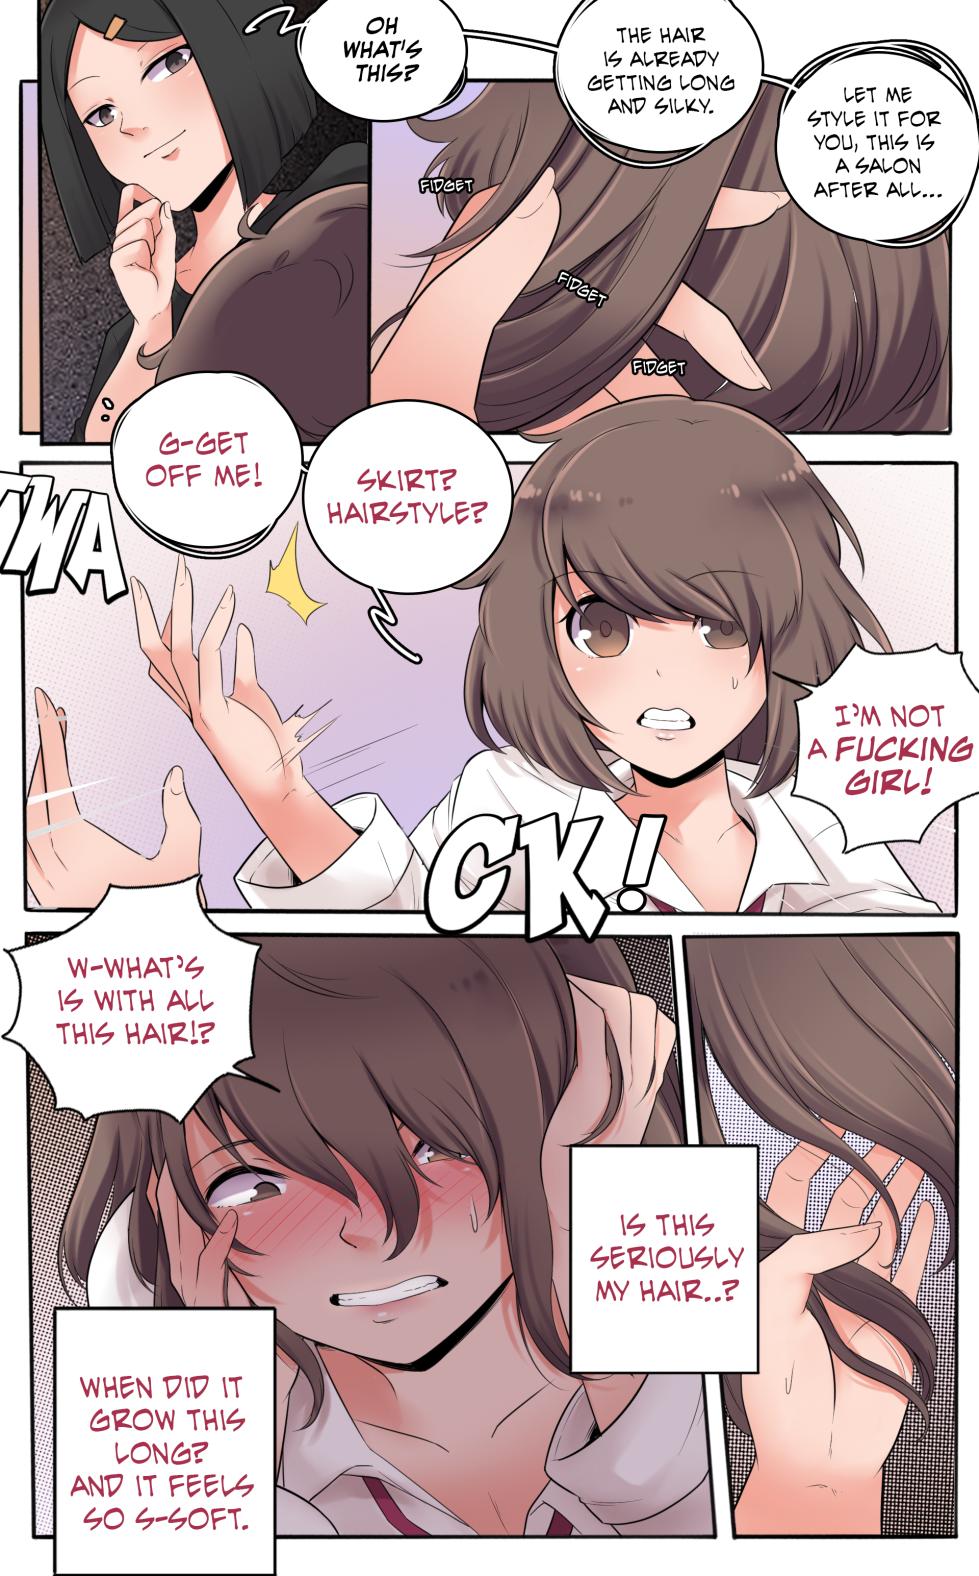 [MeowWithMe] Girlfriend Revenge [Ongoing] - Page 11